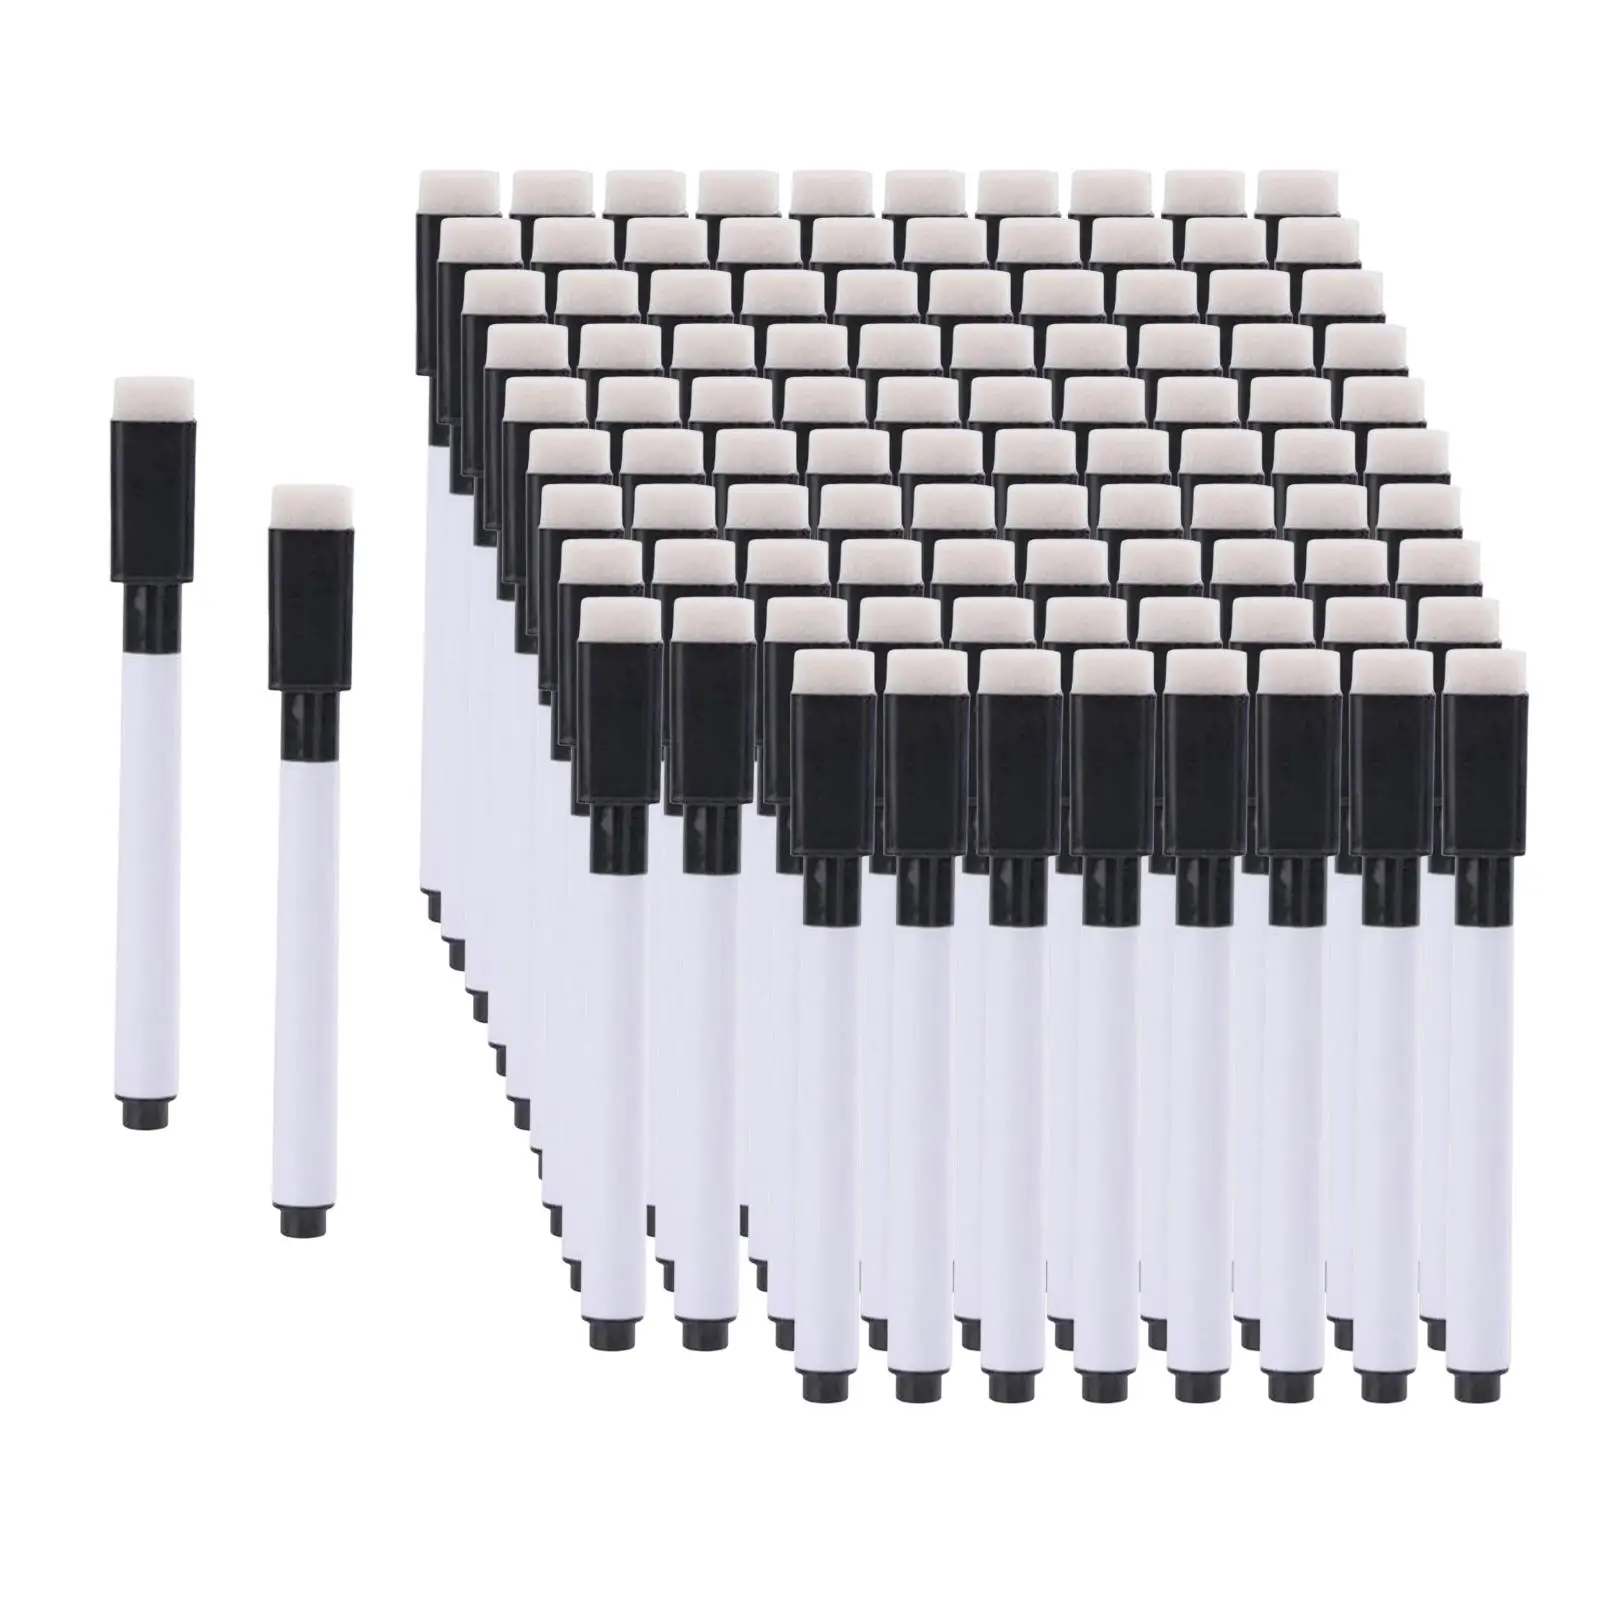 100x Whiteboard Marker Pens White Board Pen Writing Pen with Water Colour Writing for School Supplies Home Teachers Kids